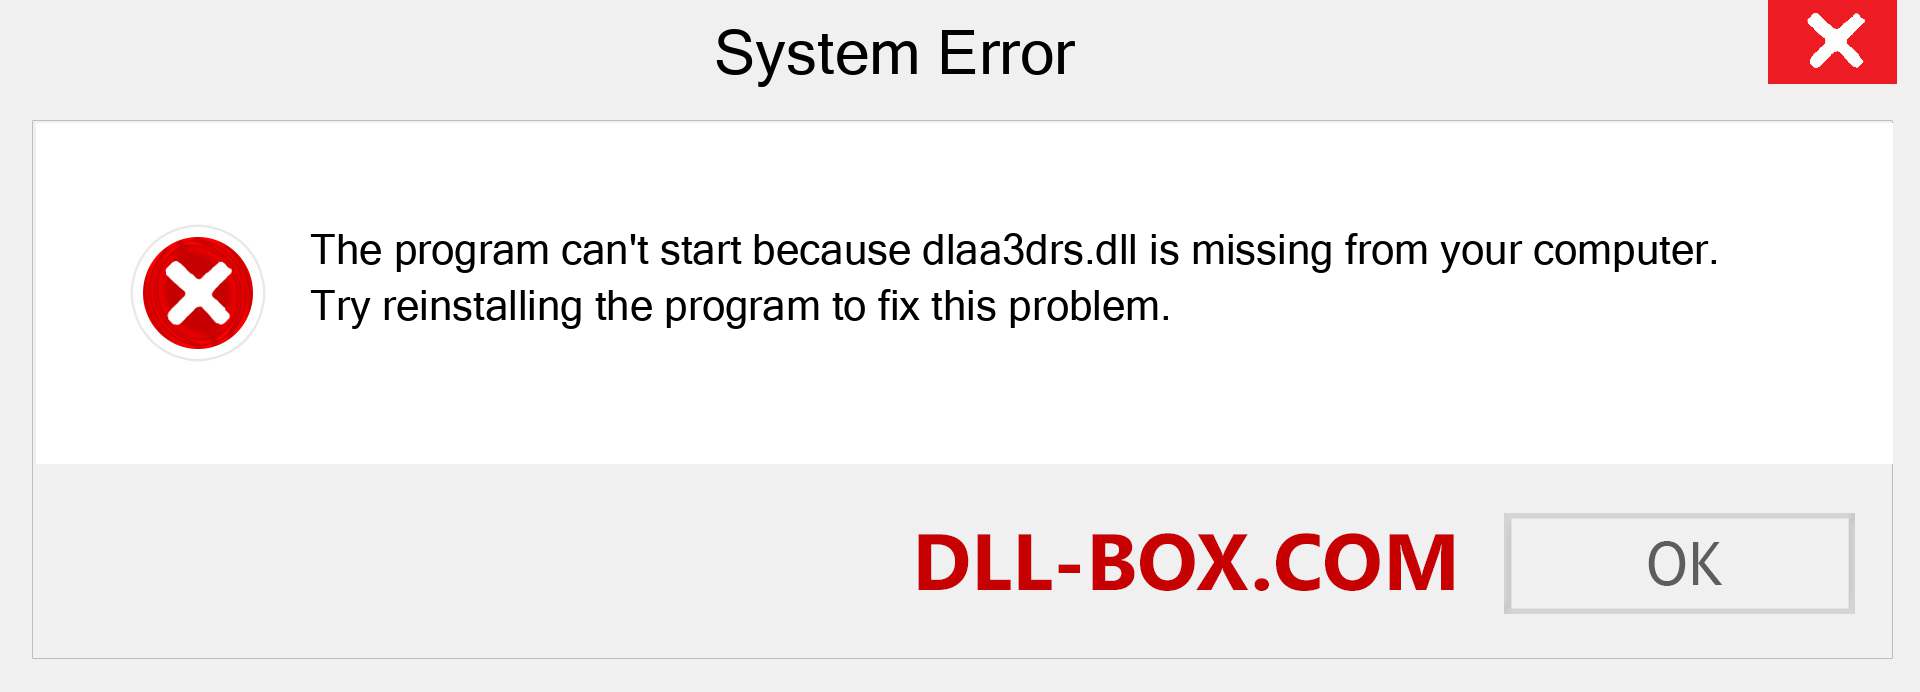  dlaa3drs.dll file is missing?. Download for Windows 7, 8, 10 - Fix  dlaa3drs dll Missing Error on Windows, photos, images